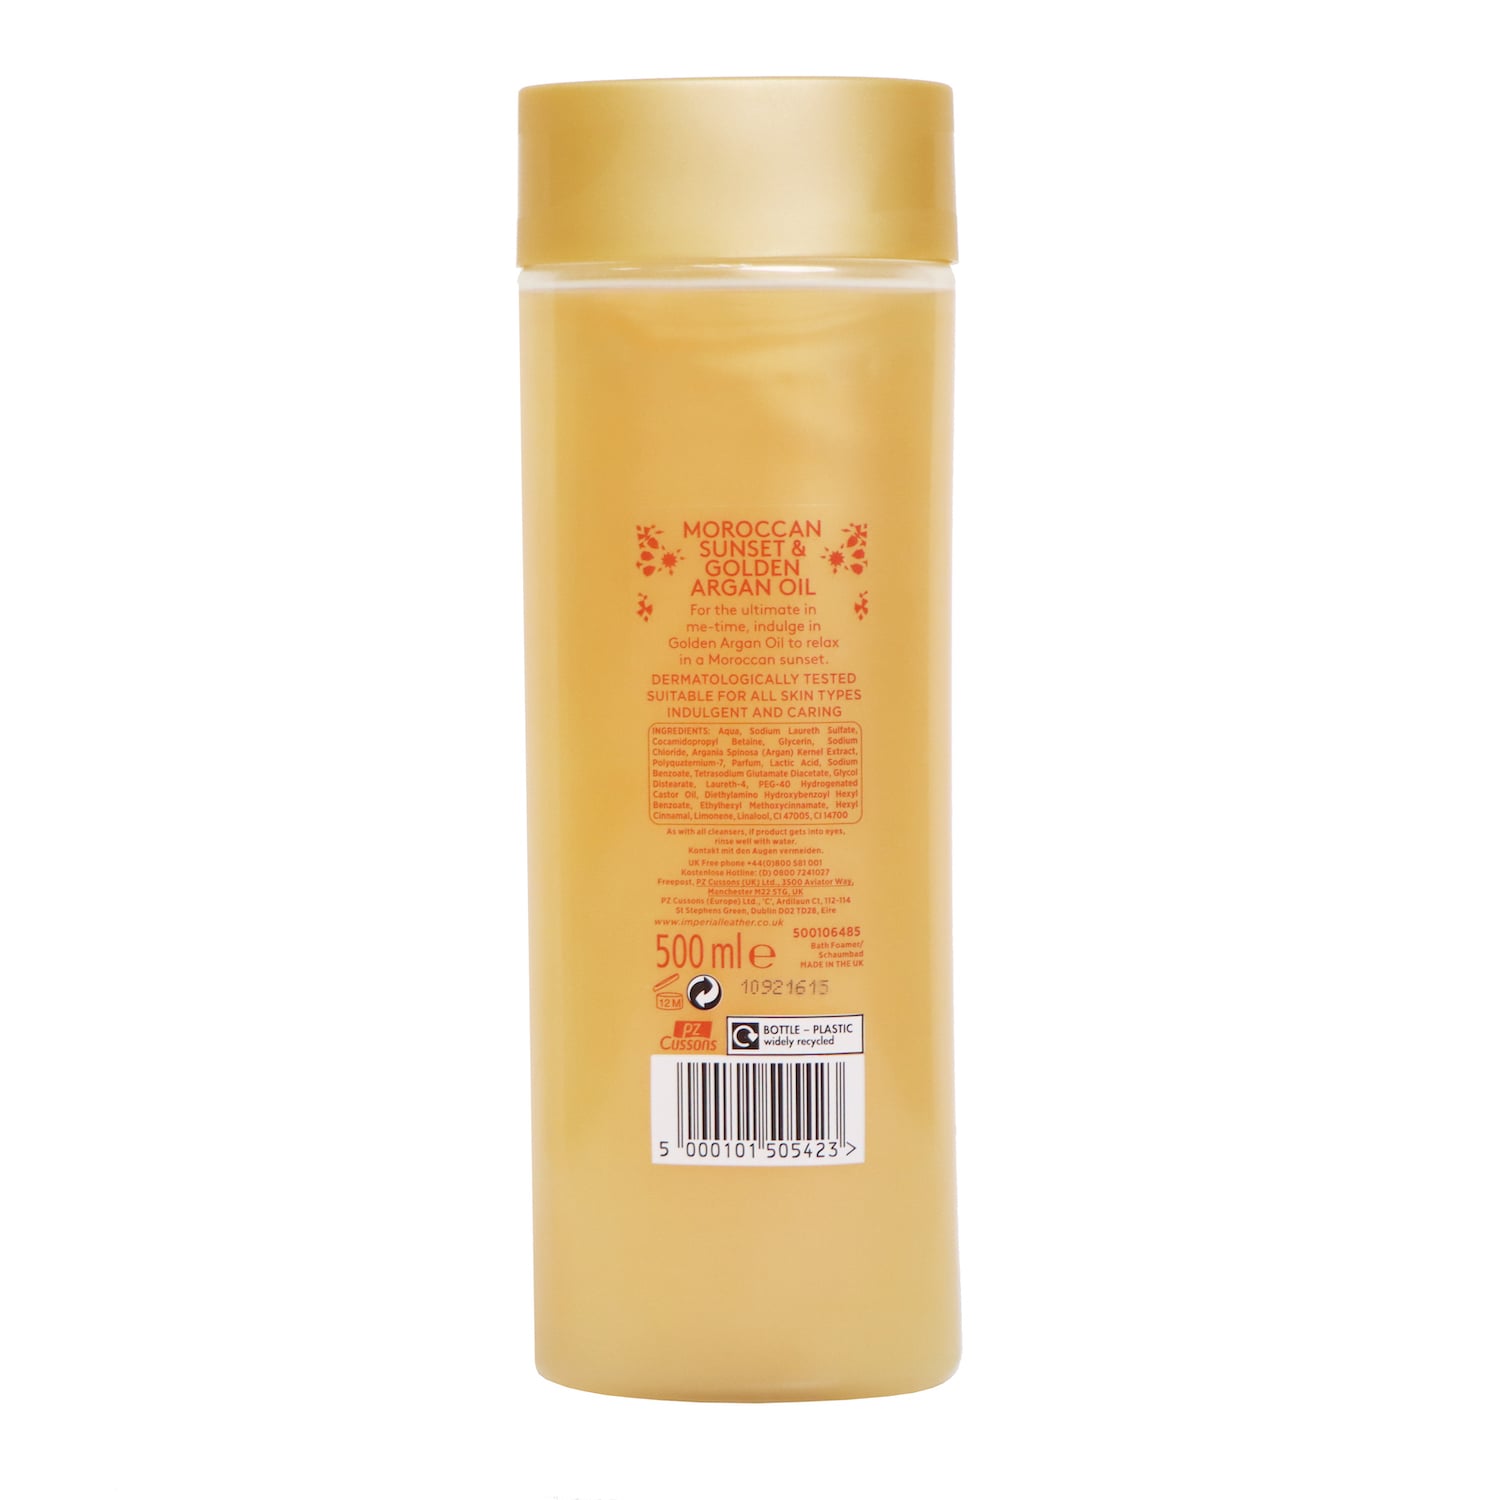 [Cussons] Imperial Leather Moroccan Spa Bath Cream 500ml